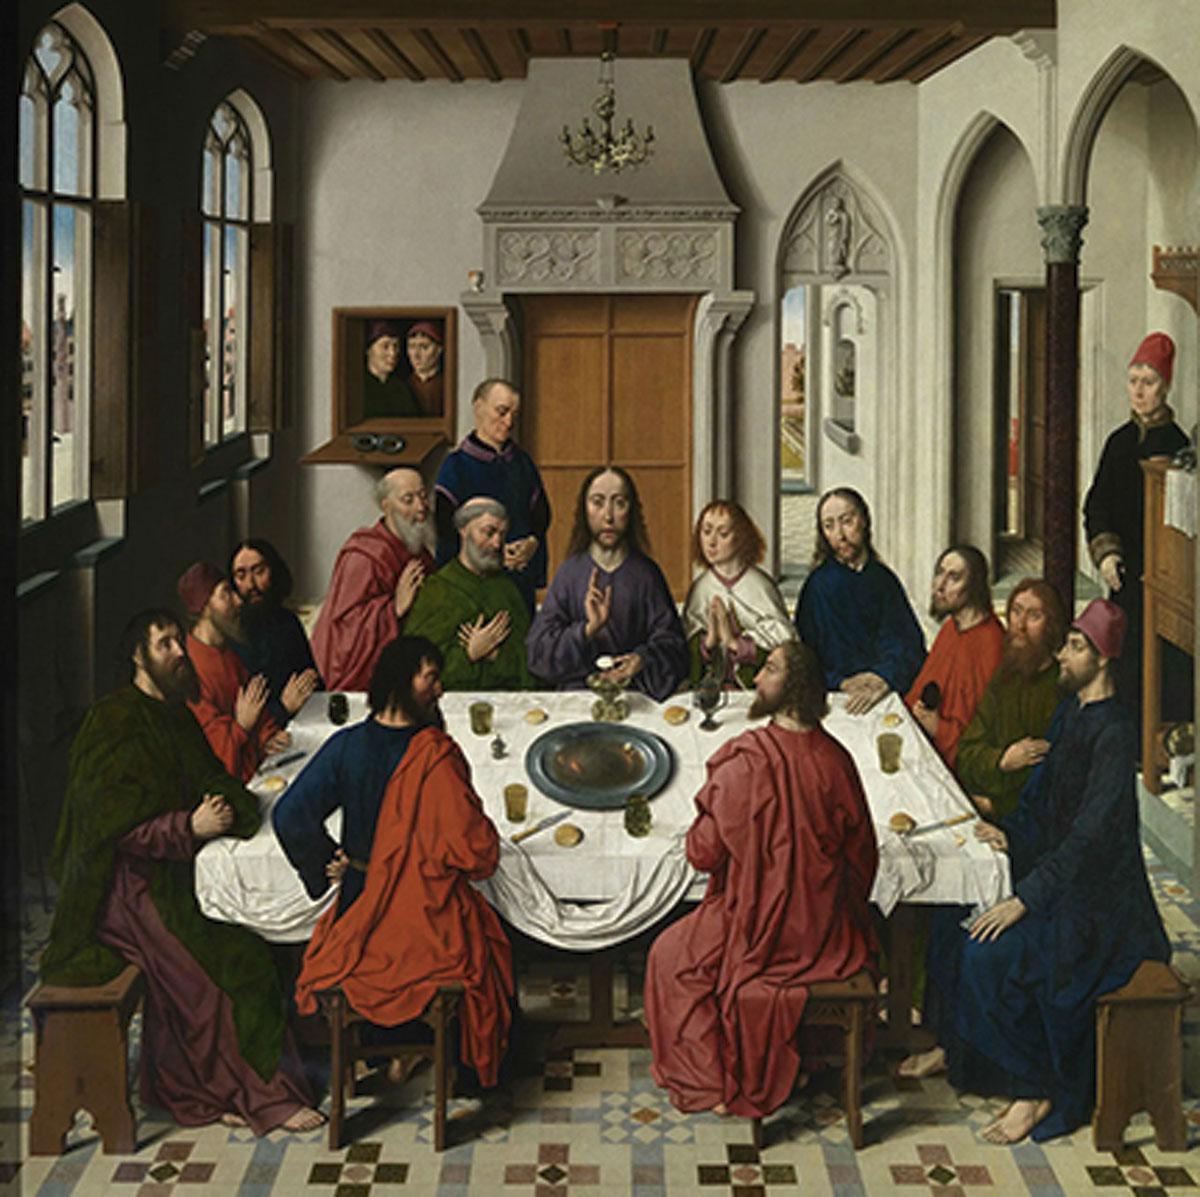 The Last Supper, Dieric Bouts, 1464-1468